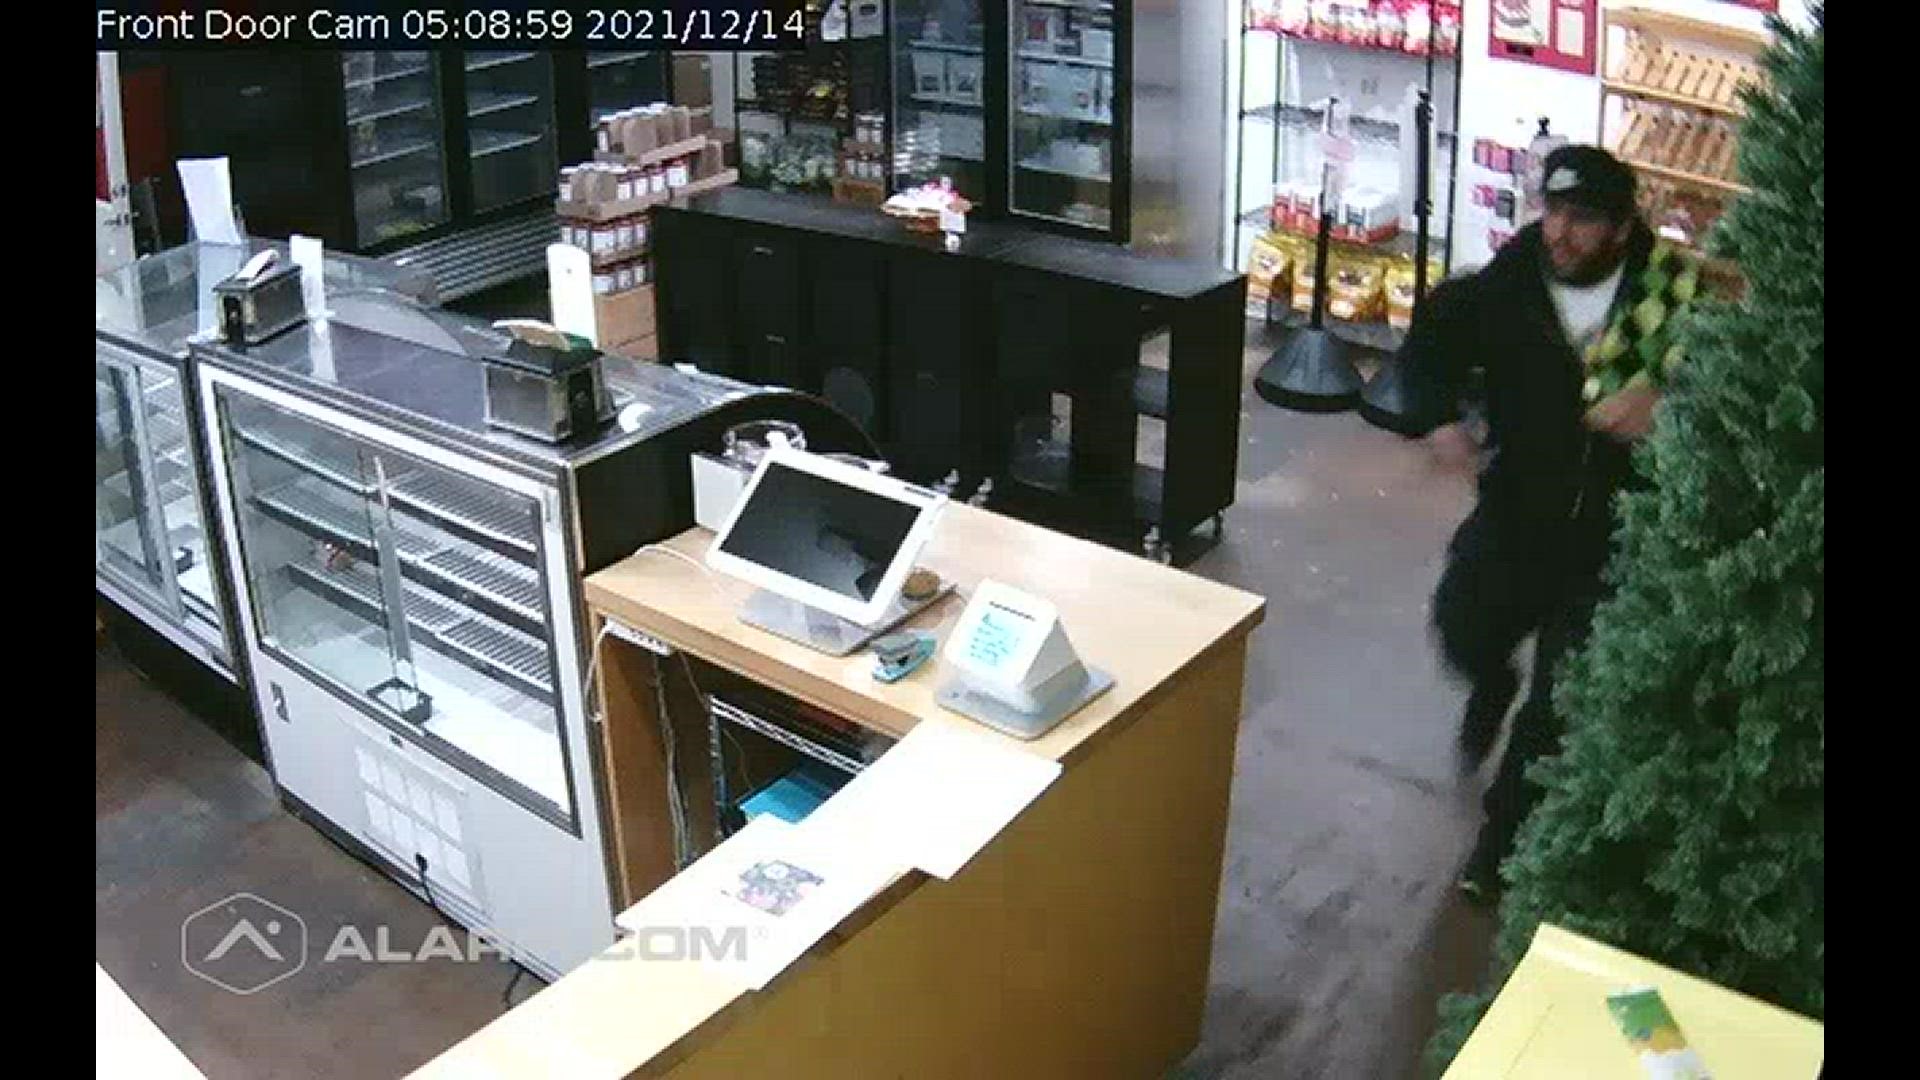 Dee's One Smart Cookie in Glastonbury released this surveillance footage in hopes of identifying the man they said has broken into the bakery at least two times.